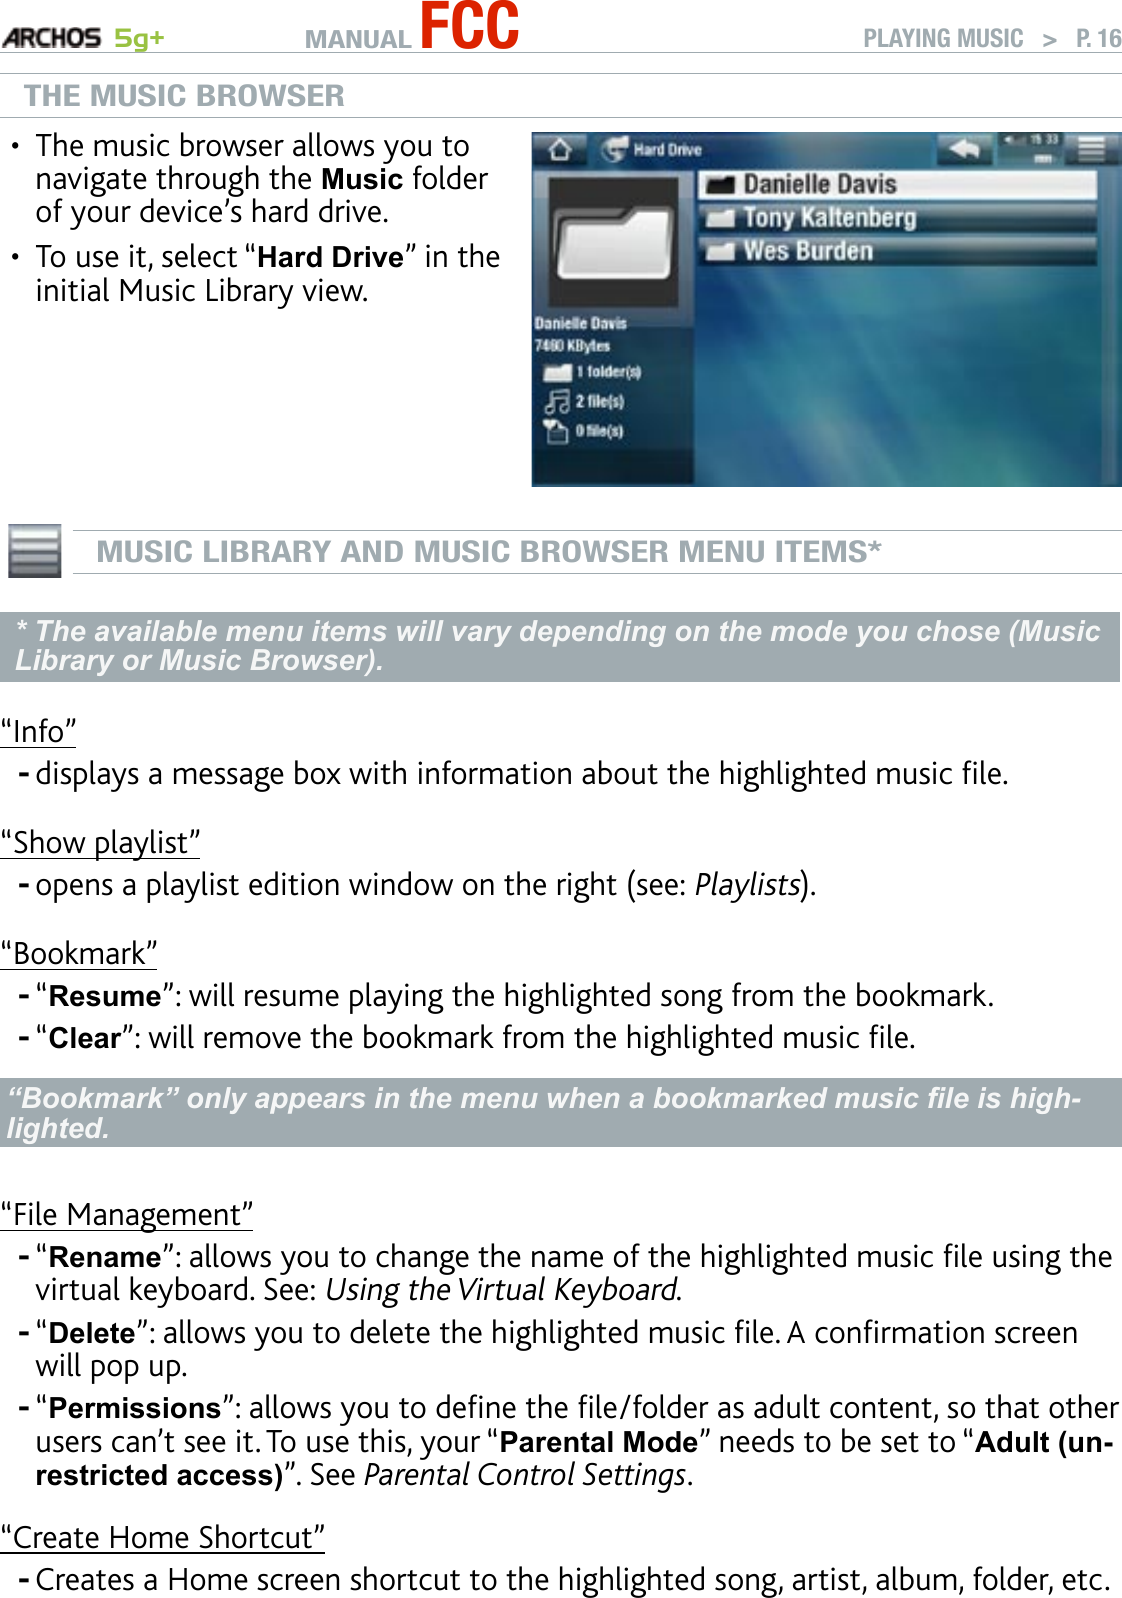 MANUAL FCC 5g+ PLAYING MUSIC   &gt;   P. 16THE MUSIC BROWSERThe music browser allows you to navigate through the Music folder of your device’s hard drive. To use it, select “Hard Drive” in the initial Music Library view.•• MUSIC LIBRARY AND MUSIC BROWSER MENU ITEMS** The available menu items will vary depending on the mode you chose (Music Library or Music Browser).“Info”displays a message box with information about the highlighted music le.“Show playlist”opens a playlist edition window on the right (see: Playlists).“Bookmark”“Resume”: will resume playing the highlighted song from the bookmark.“Clear”: will remove the bookmark from the highlighted music le.“Bookmark” only appears in the menu when a bookmarked music le is high-lighted.“File Management”“Rename”: allows you to change the name of the highlighted music le using the virtual keyboard. See: Using the Virtual Keyboard.“Delete”: allows you to delete the highlighted music le. A conrmation screen will pop up.“Permissions”: allows you to dene the le/folder as adult content, so that other users can’t see it. To use this, your “Parental Mode” needs to be set to “Adult (un-restricted access)”. See Parental Control Settings.“Create Home Shortcut”Creates a Home screen shortcut to the highlighted song, artist, album, folder, etc.--------